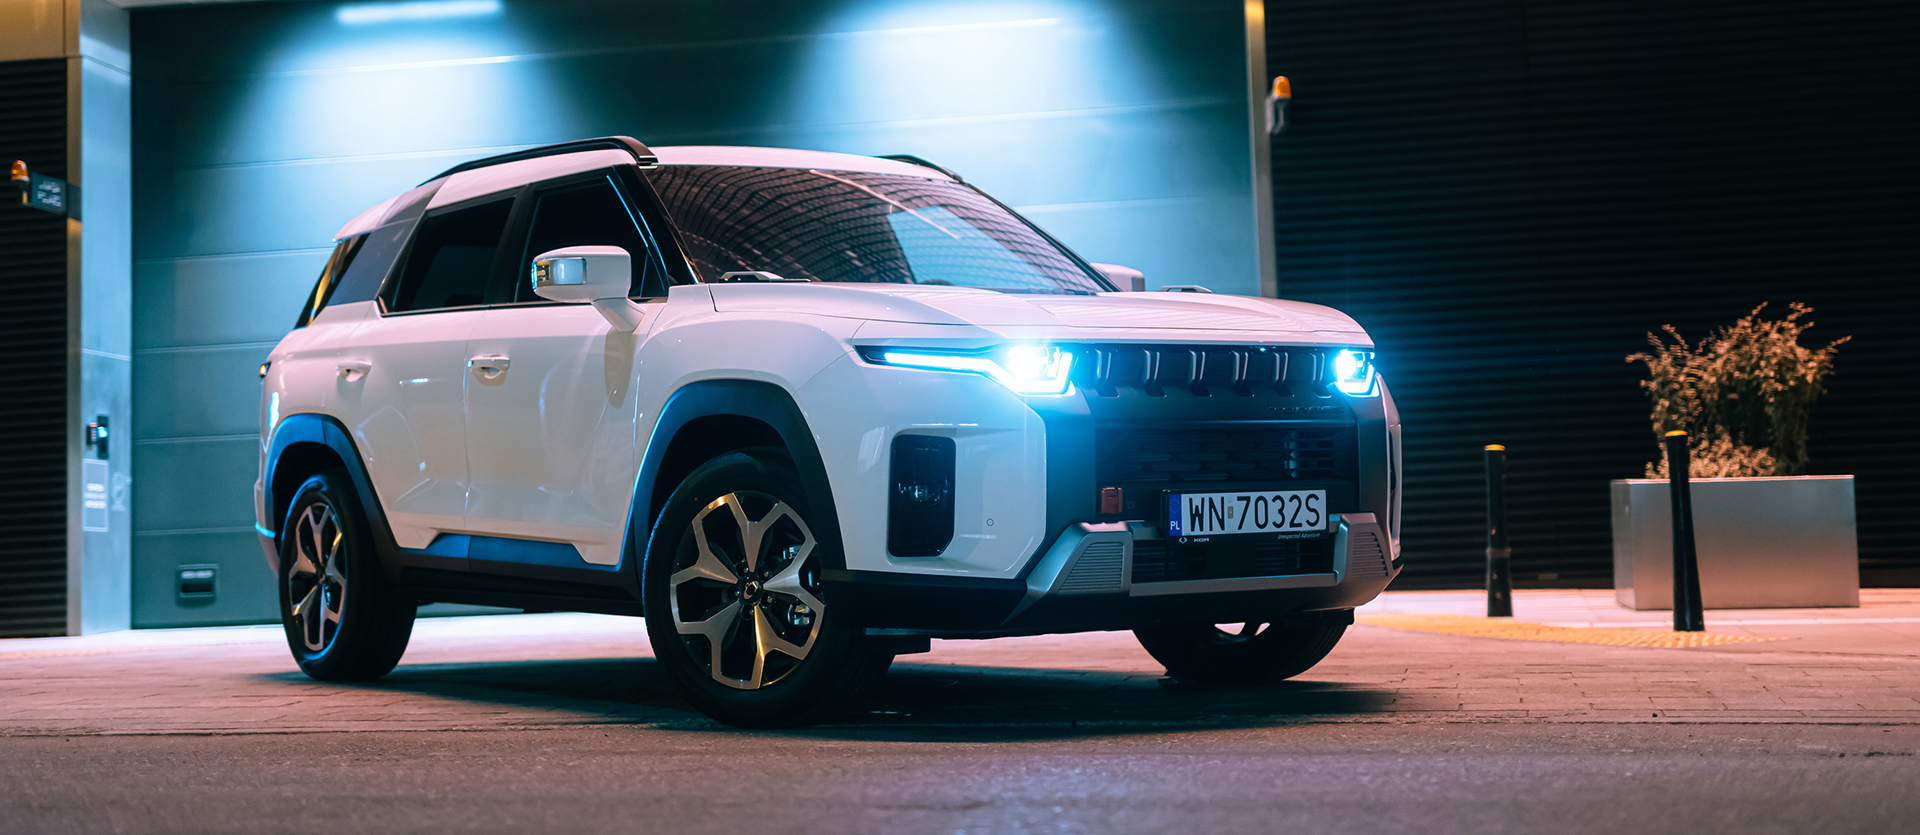 SsangYong new Tivoli - Escape from the ordinary